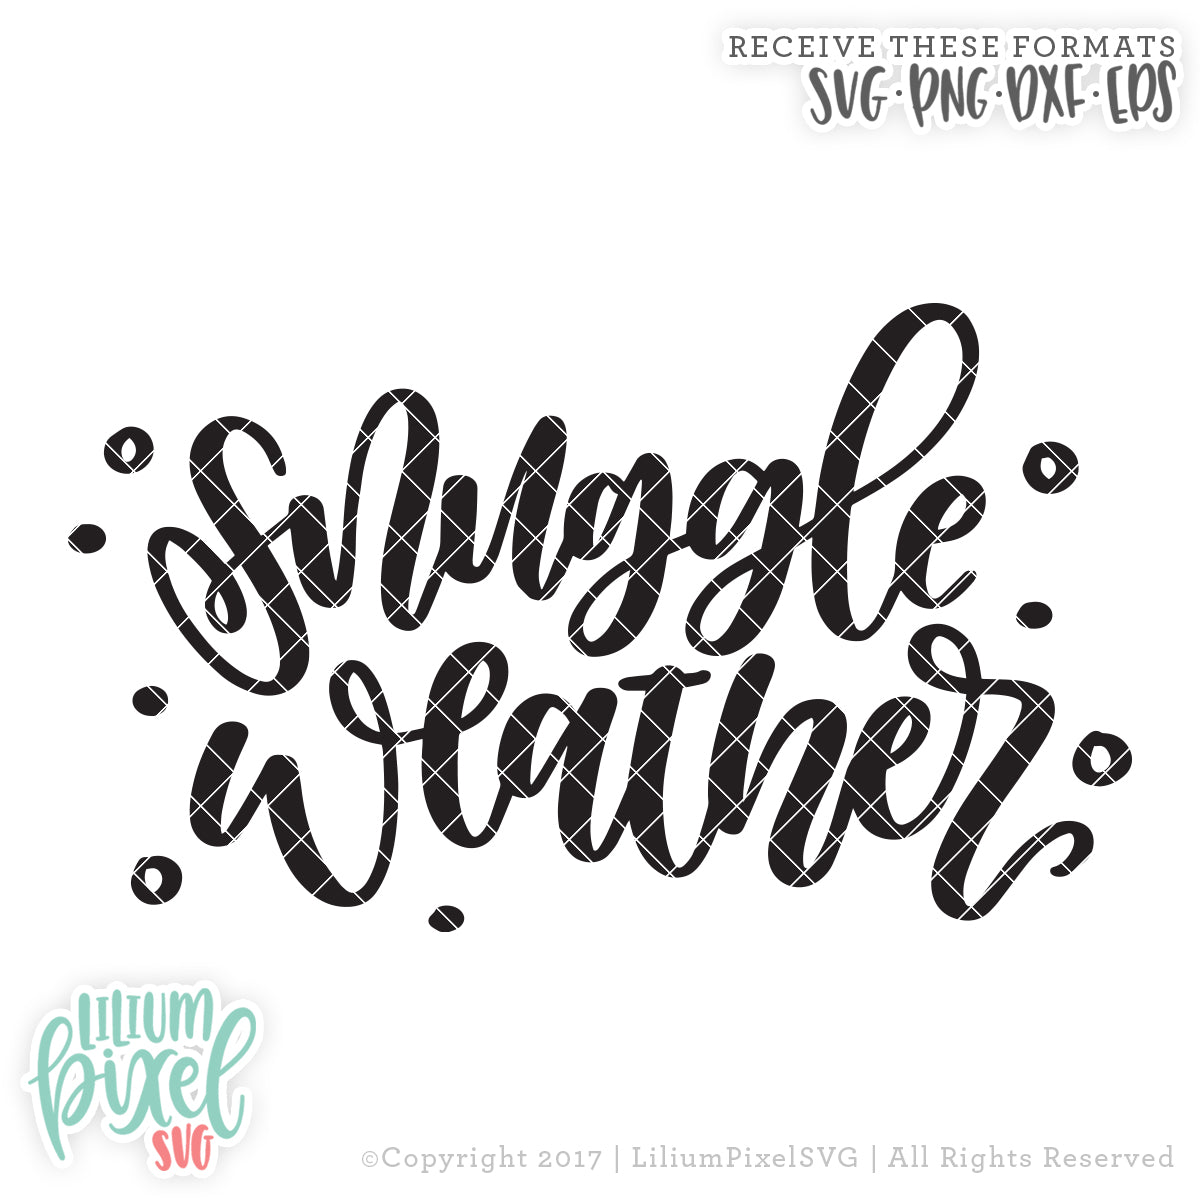 Snuggle Weather - SVG PNG DXF EPS Cut File • Silhouette • Cricut • More